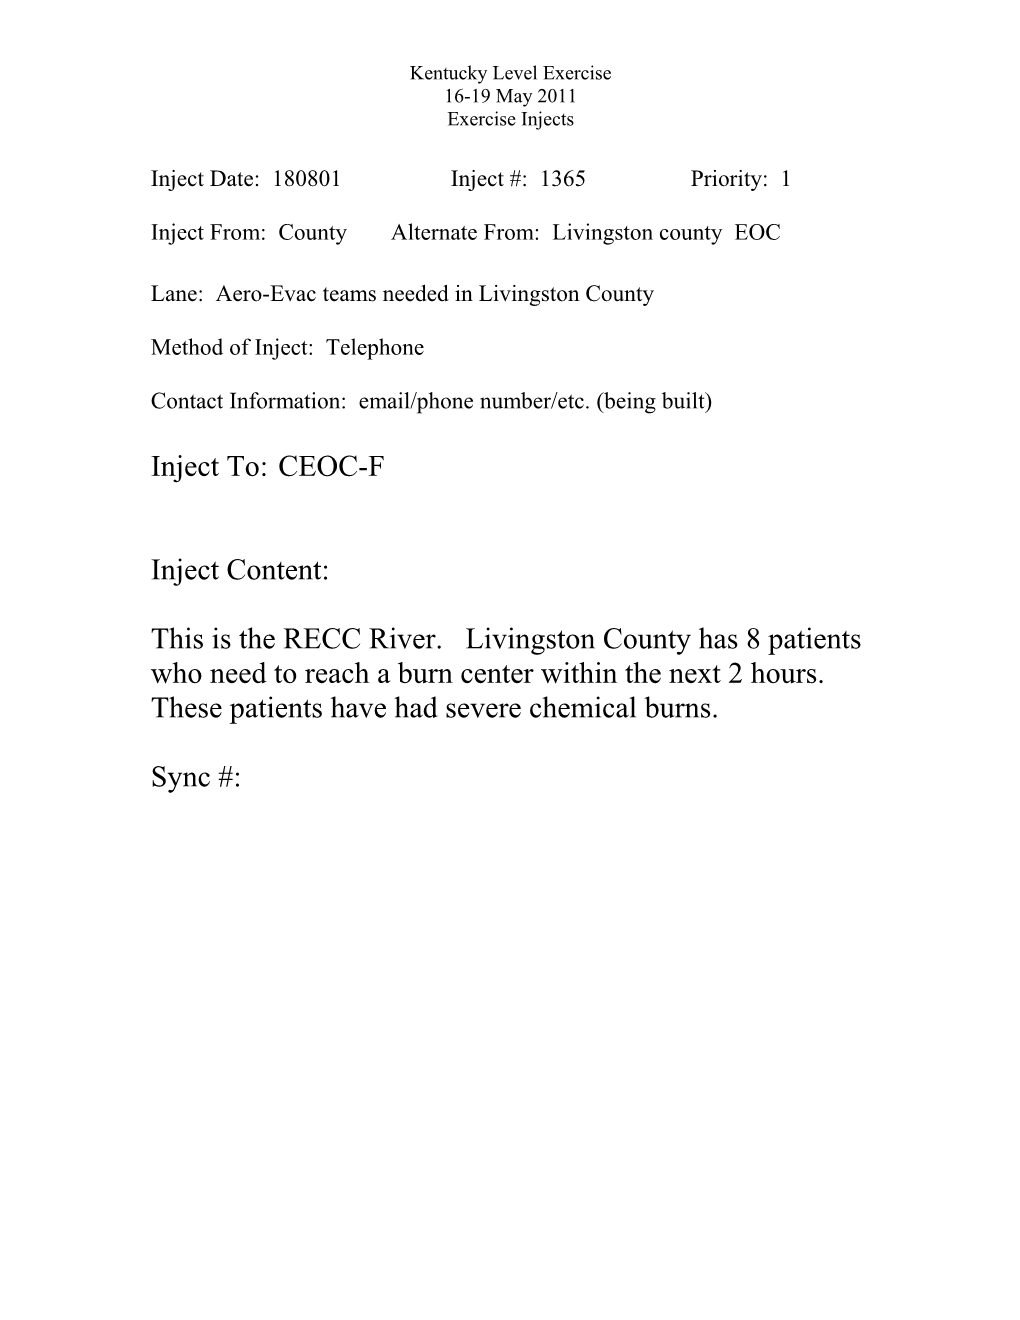 Inject From: Countyalternate From: Livingston County EOC